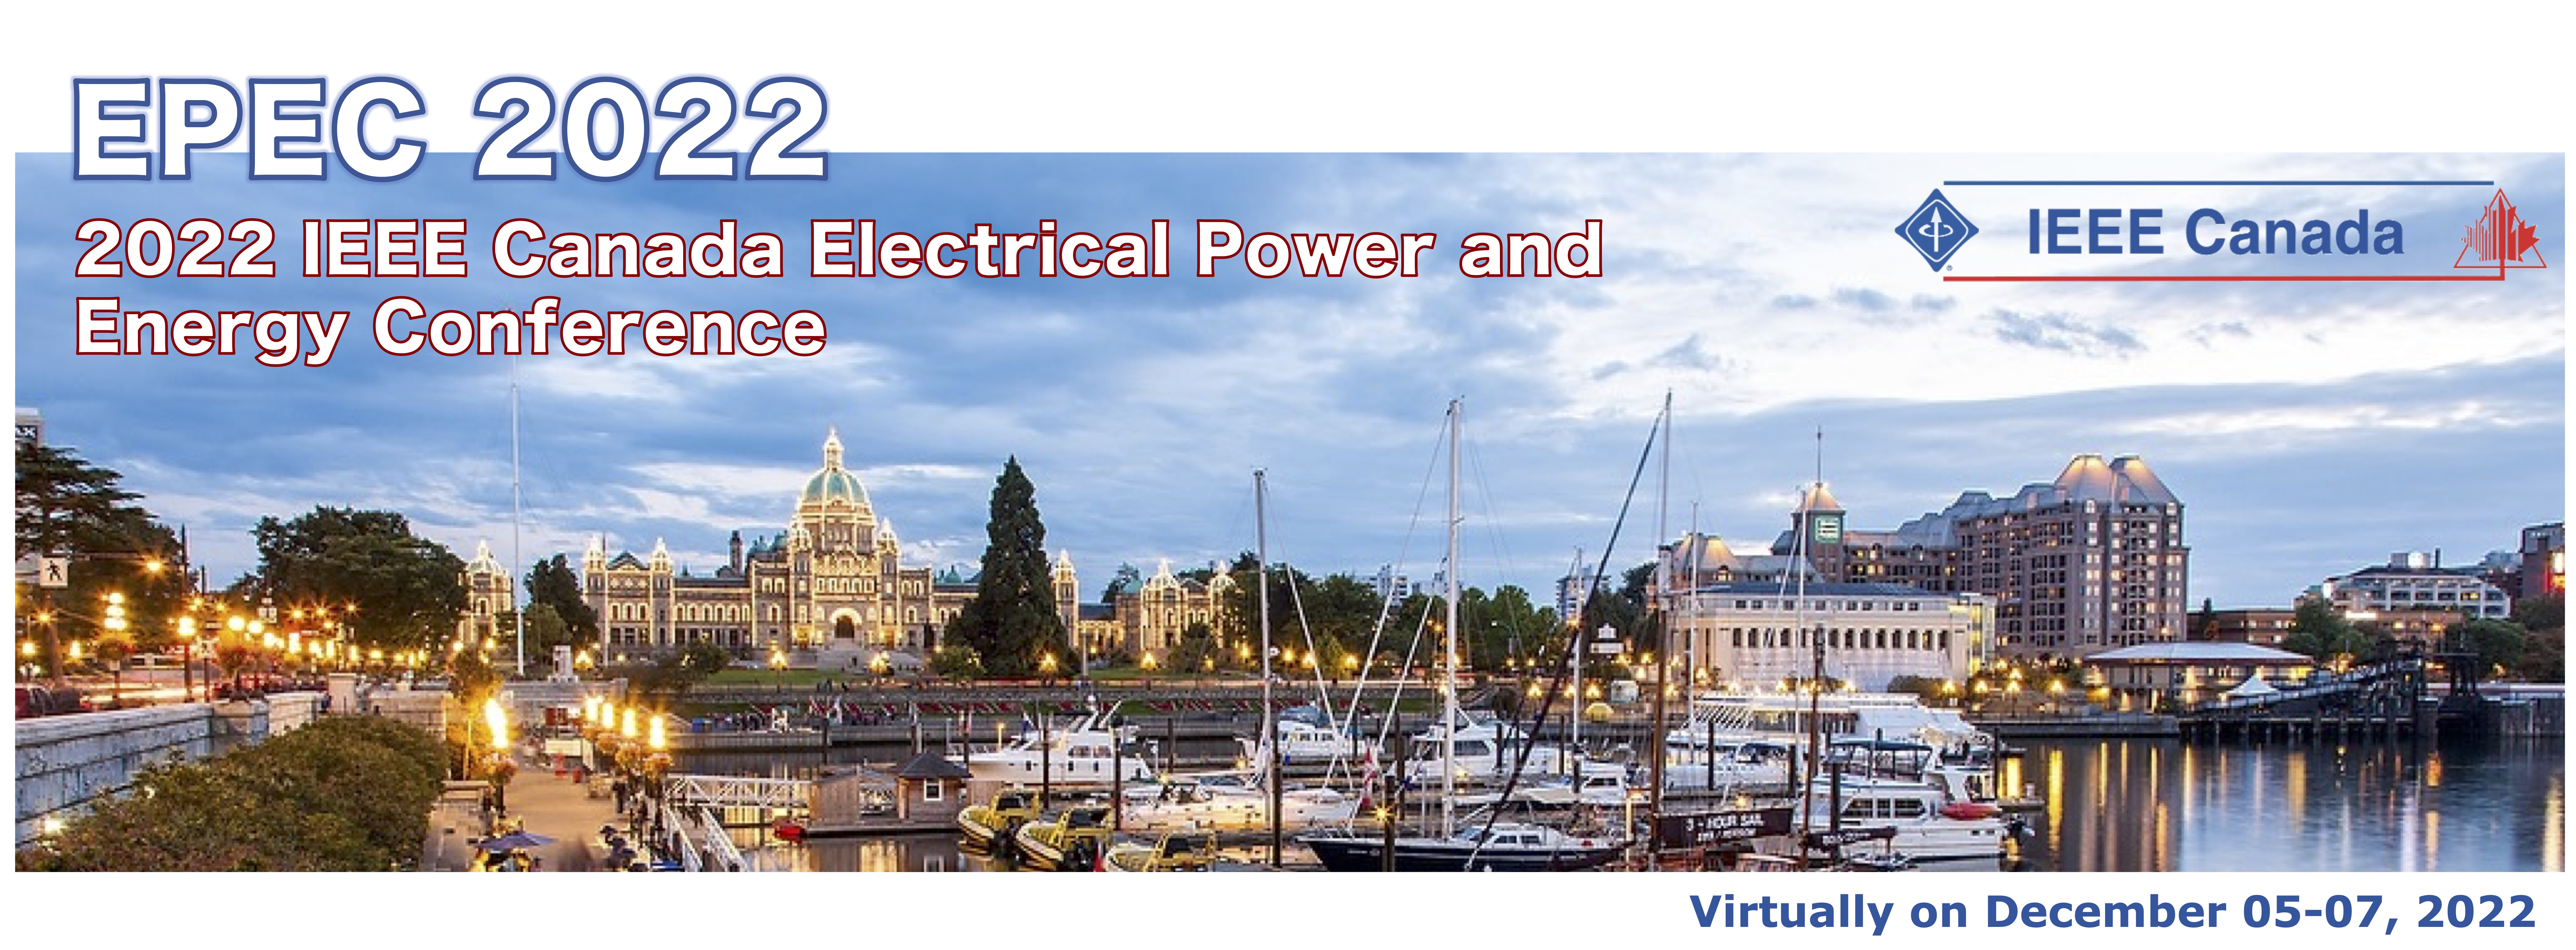 2022 IEEE Electrical Power and Energy Conference Logo